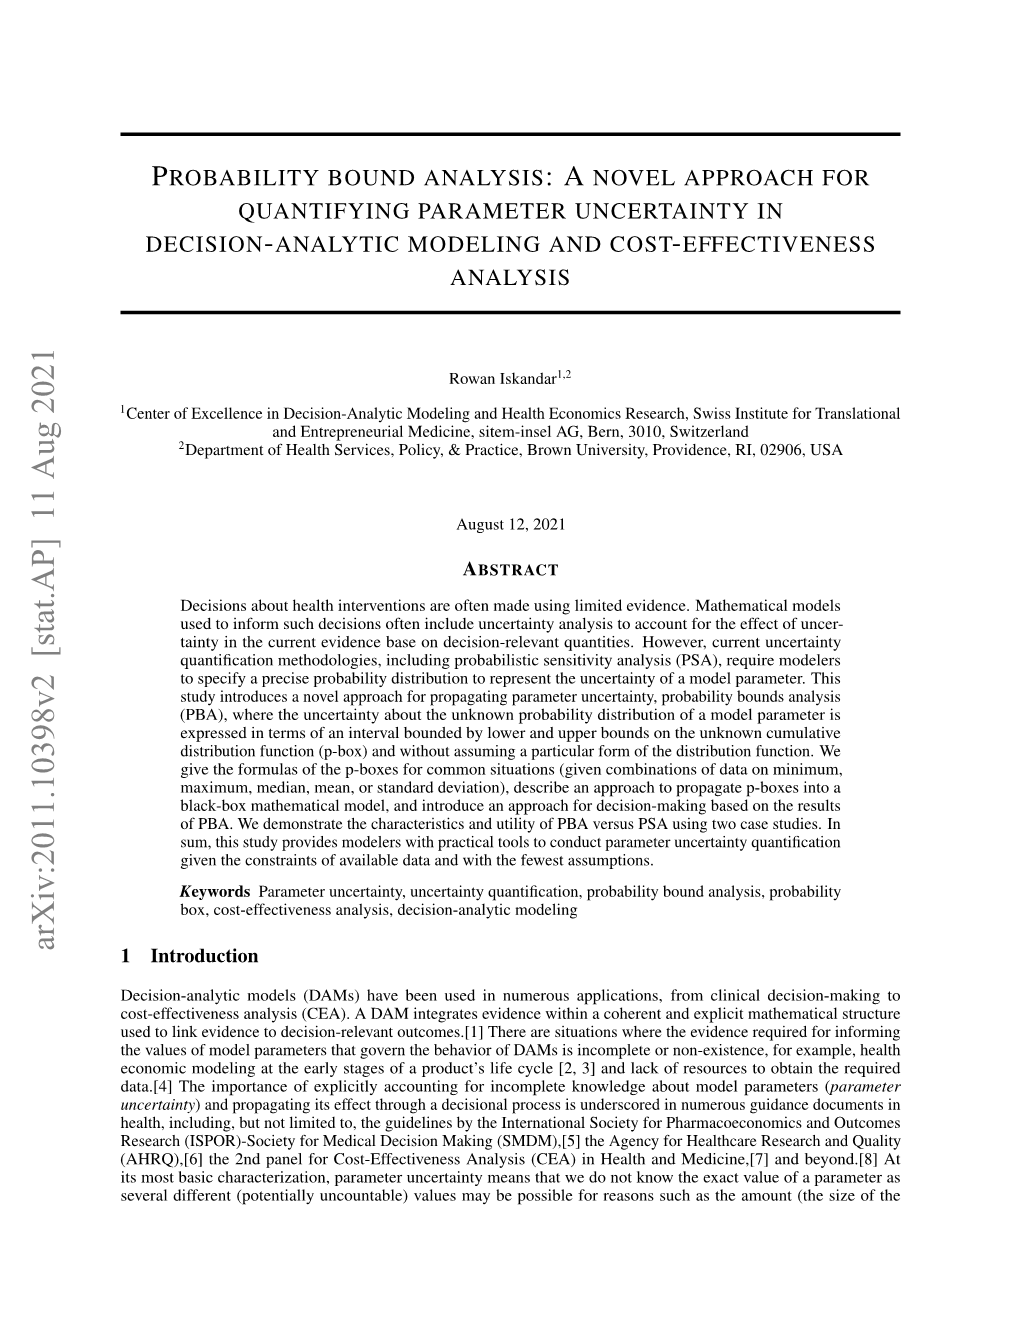 Probability Bound Analysis: a Novel Approach for Quantifying Parameter